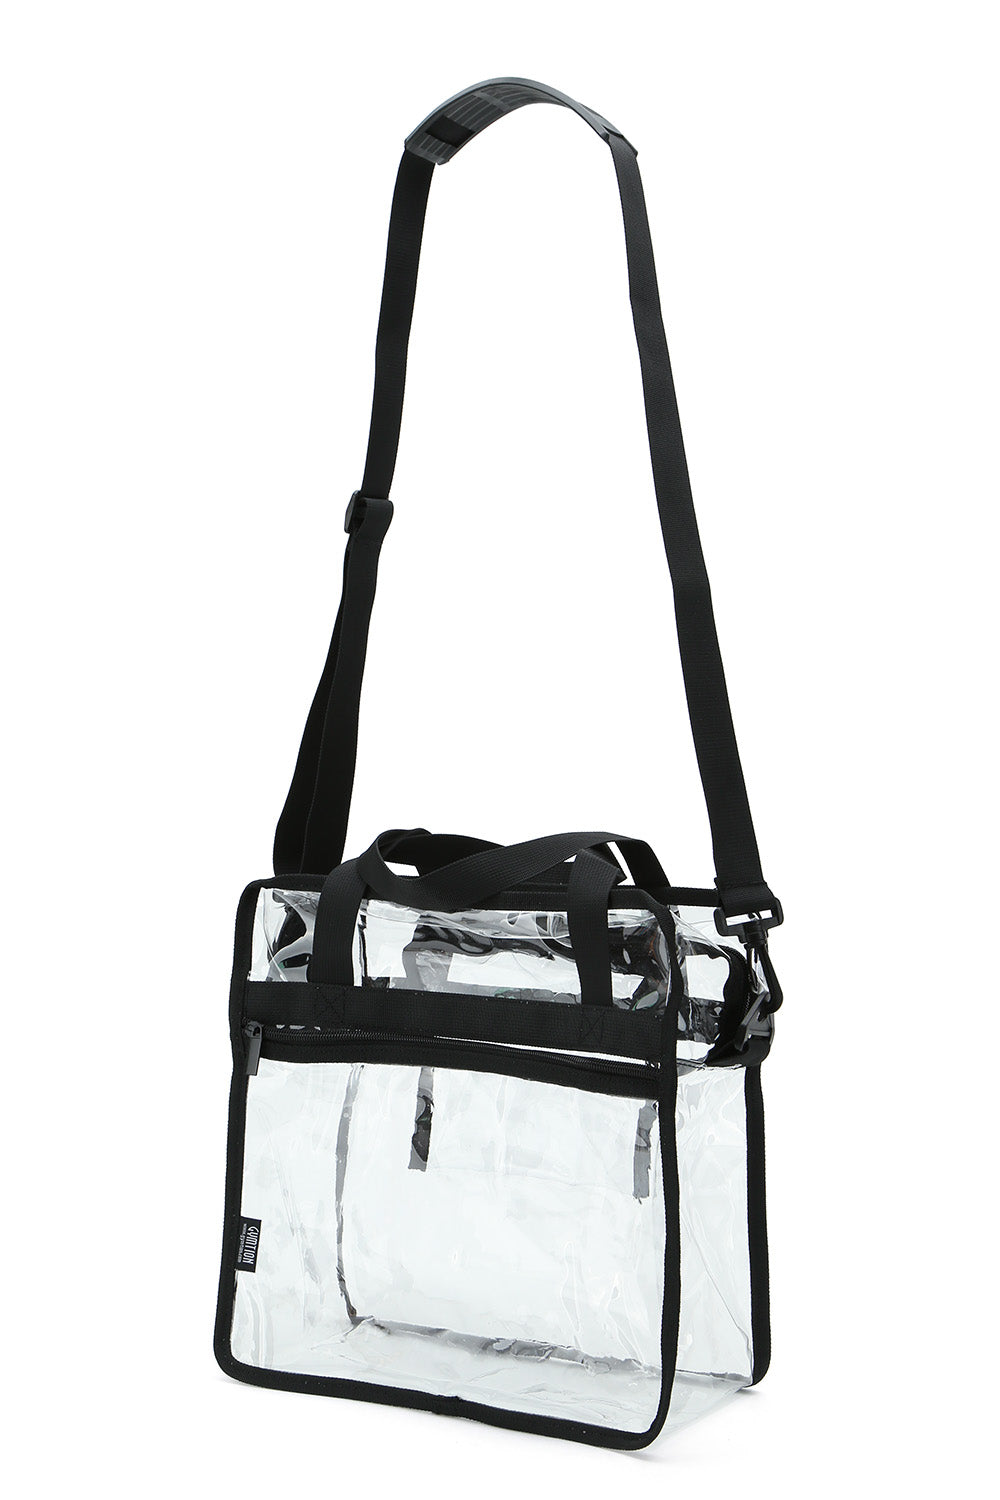 Stadium Approved Clear Tote Bag